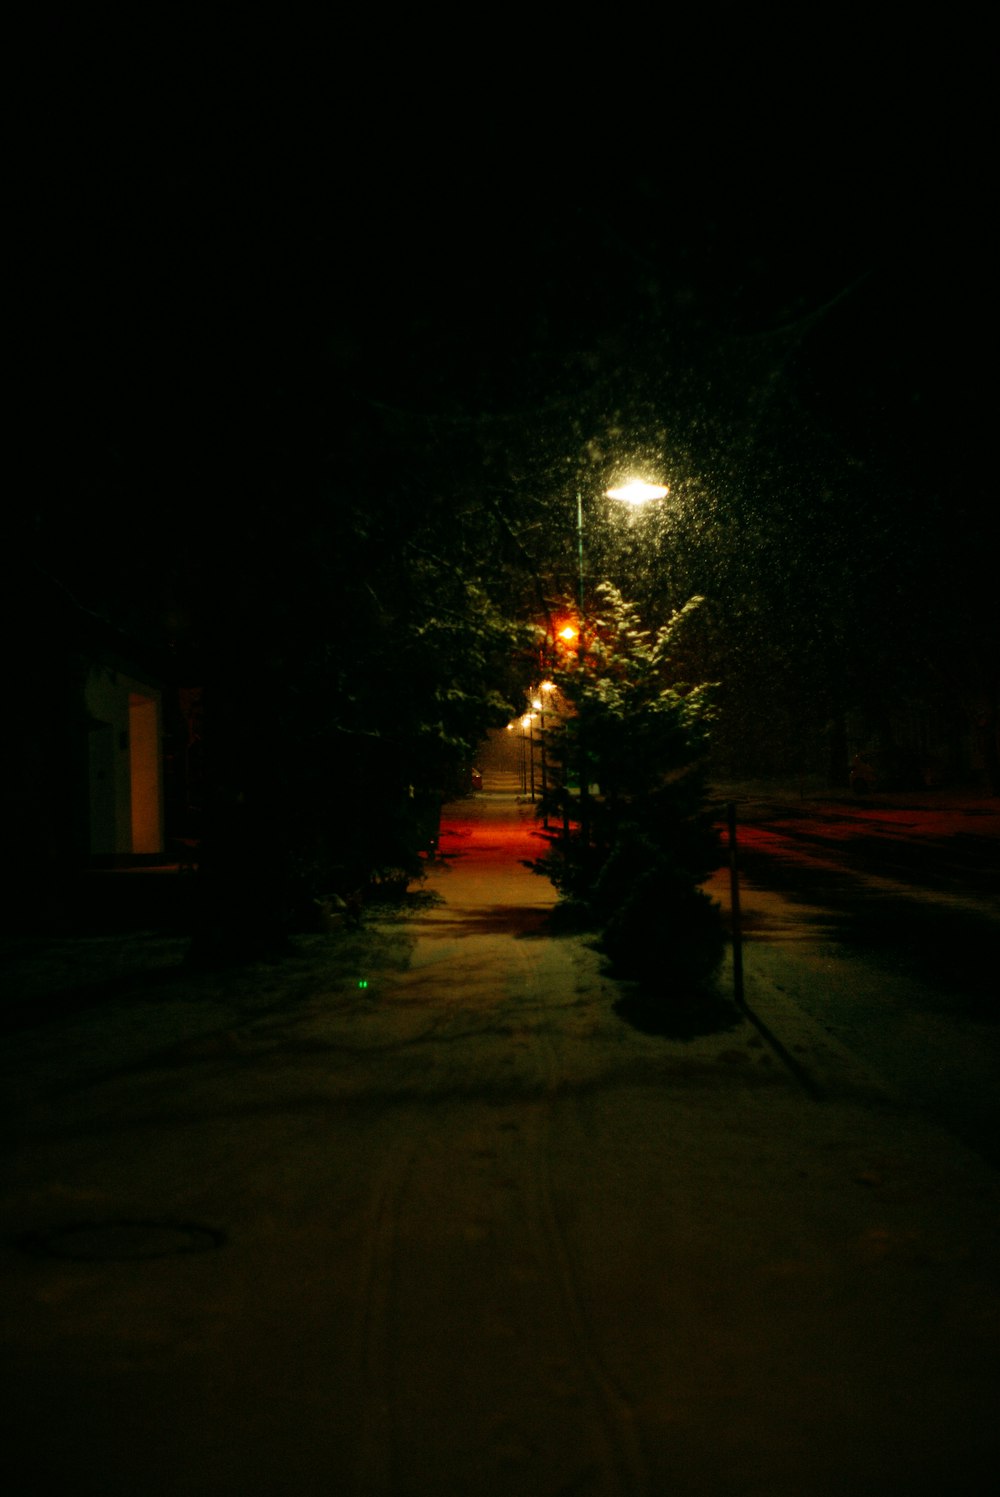 lighted street lamp during night time